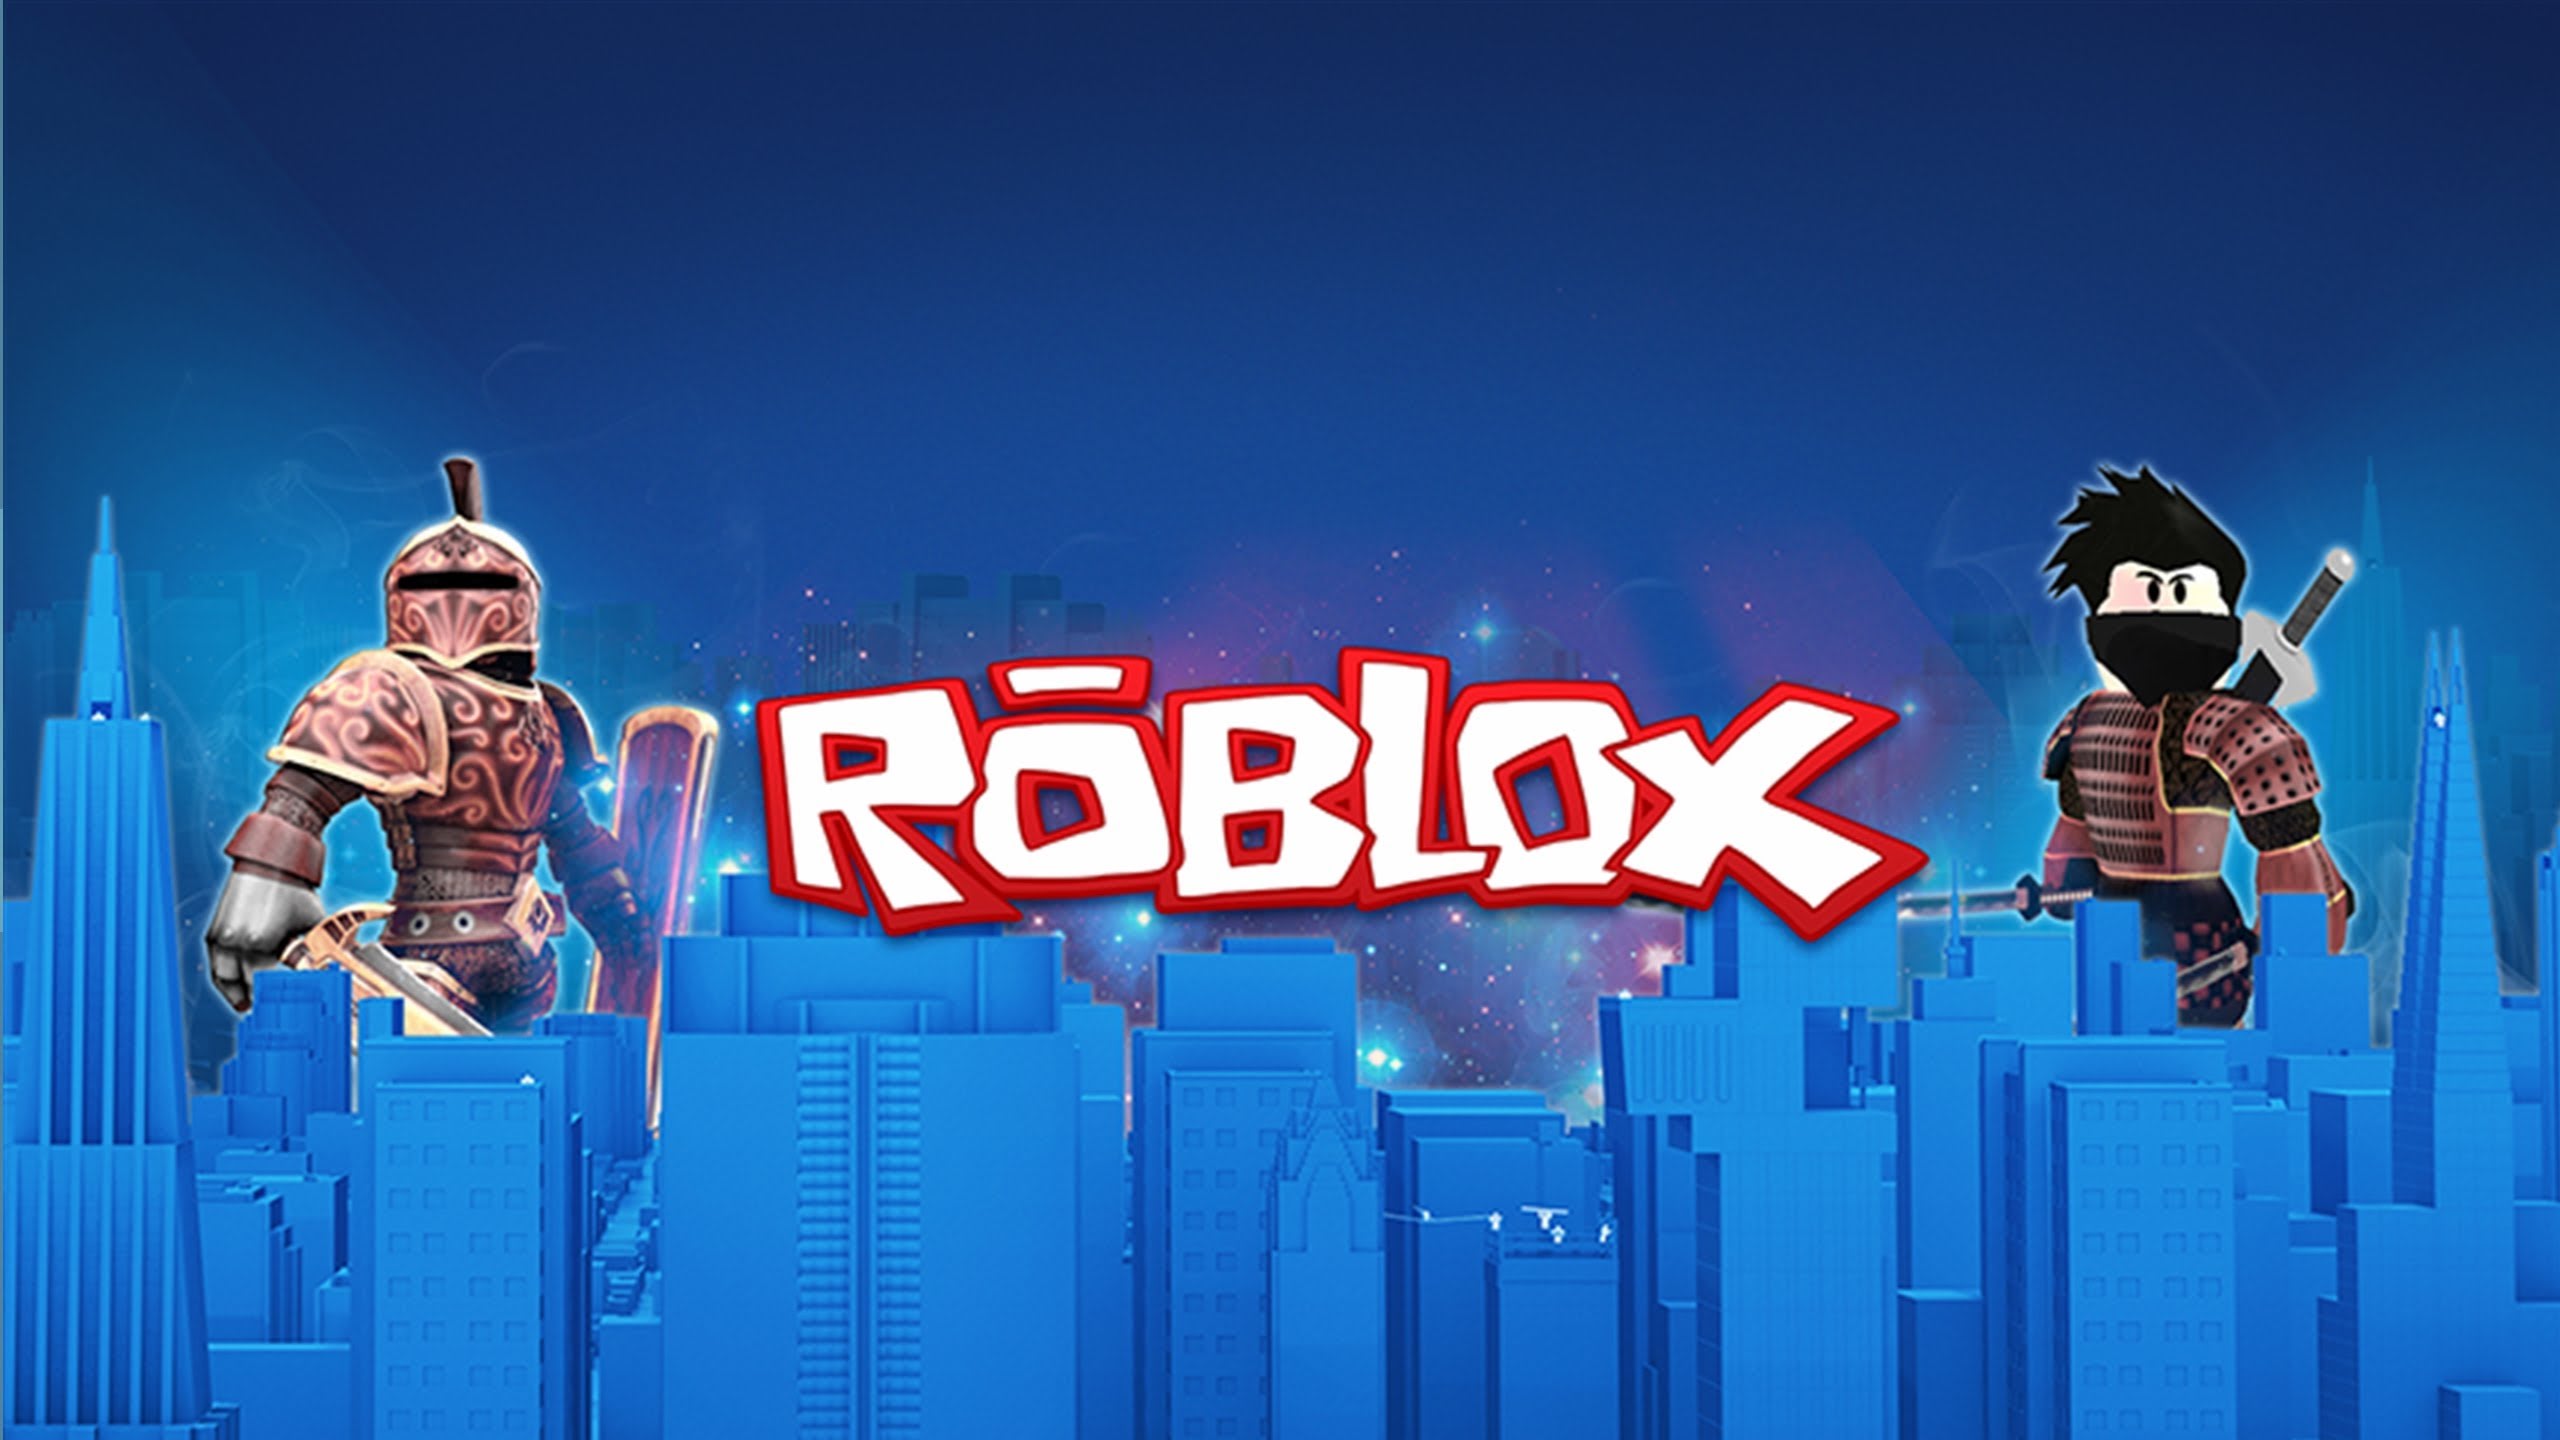 Give You Roblox Group Members By Dougciev - how to get group members in roblox